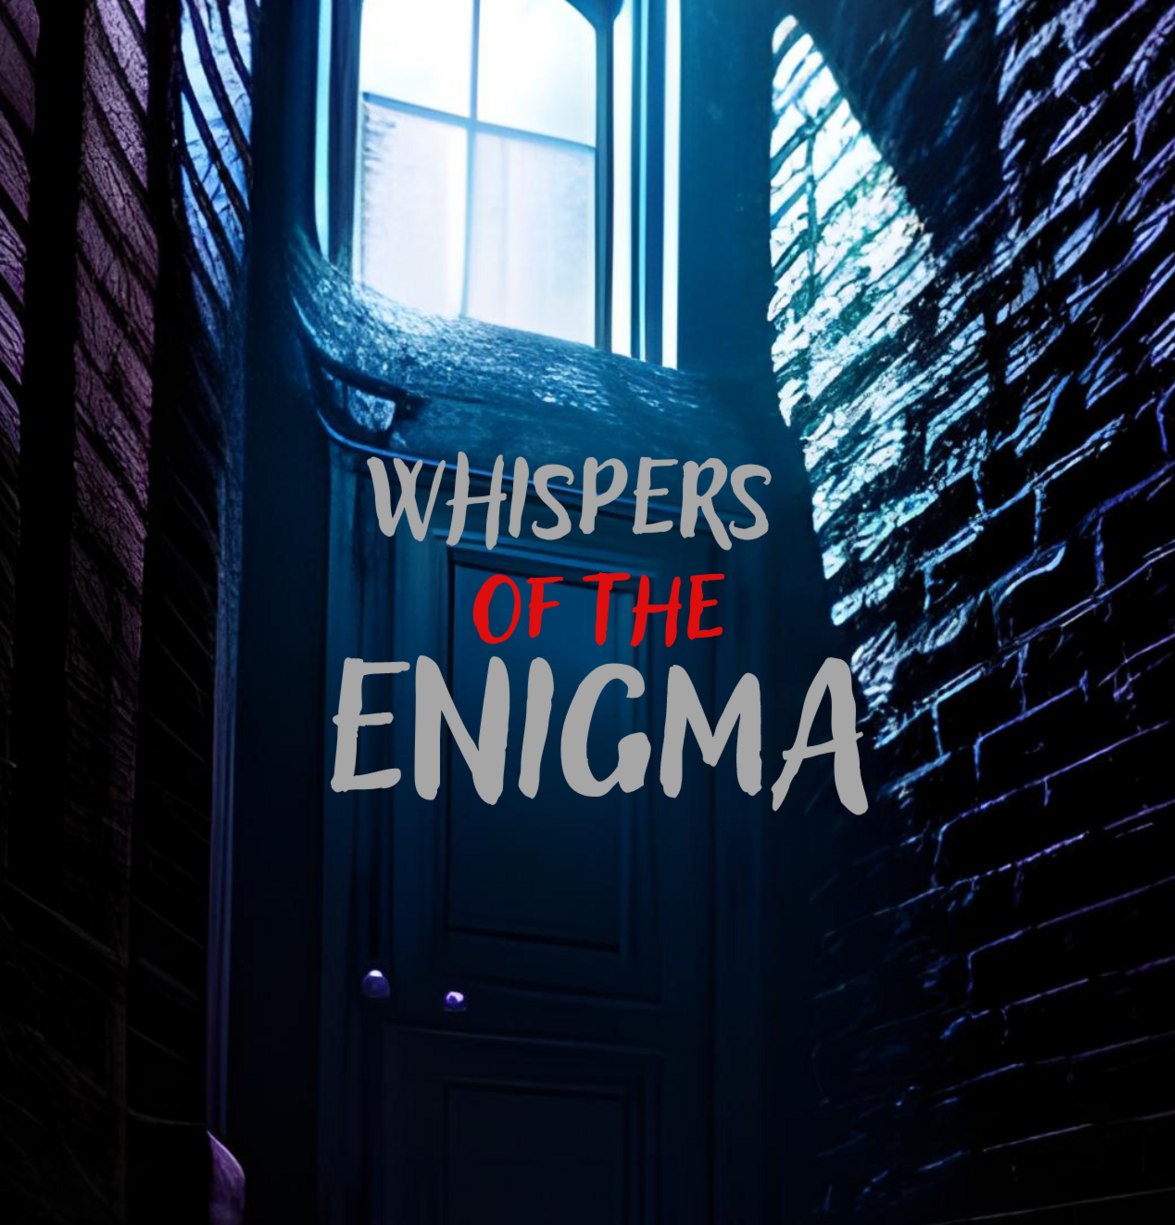 Whispers of the Enigma